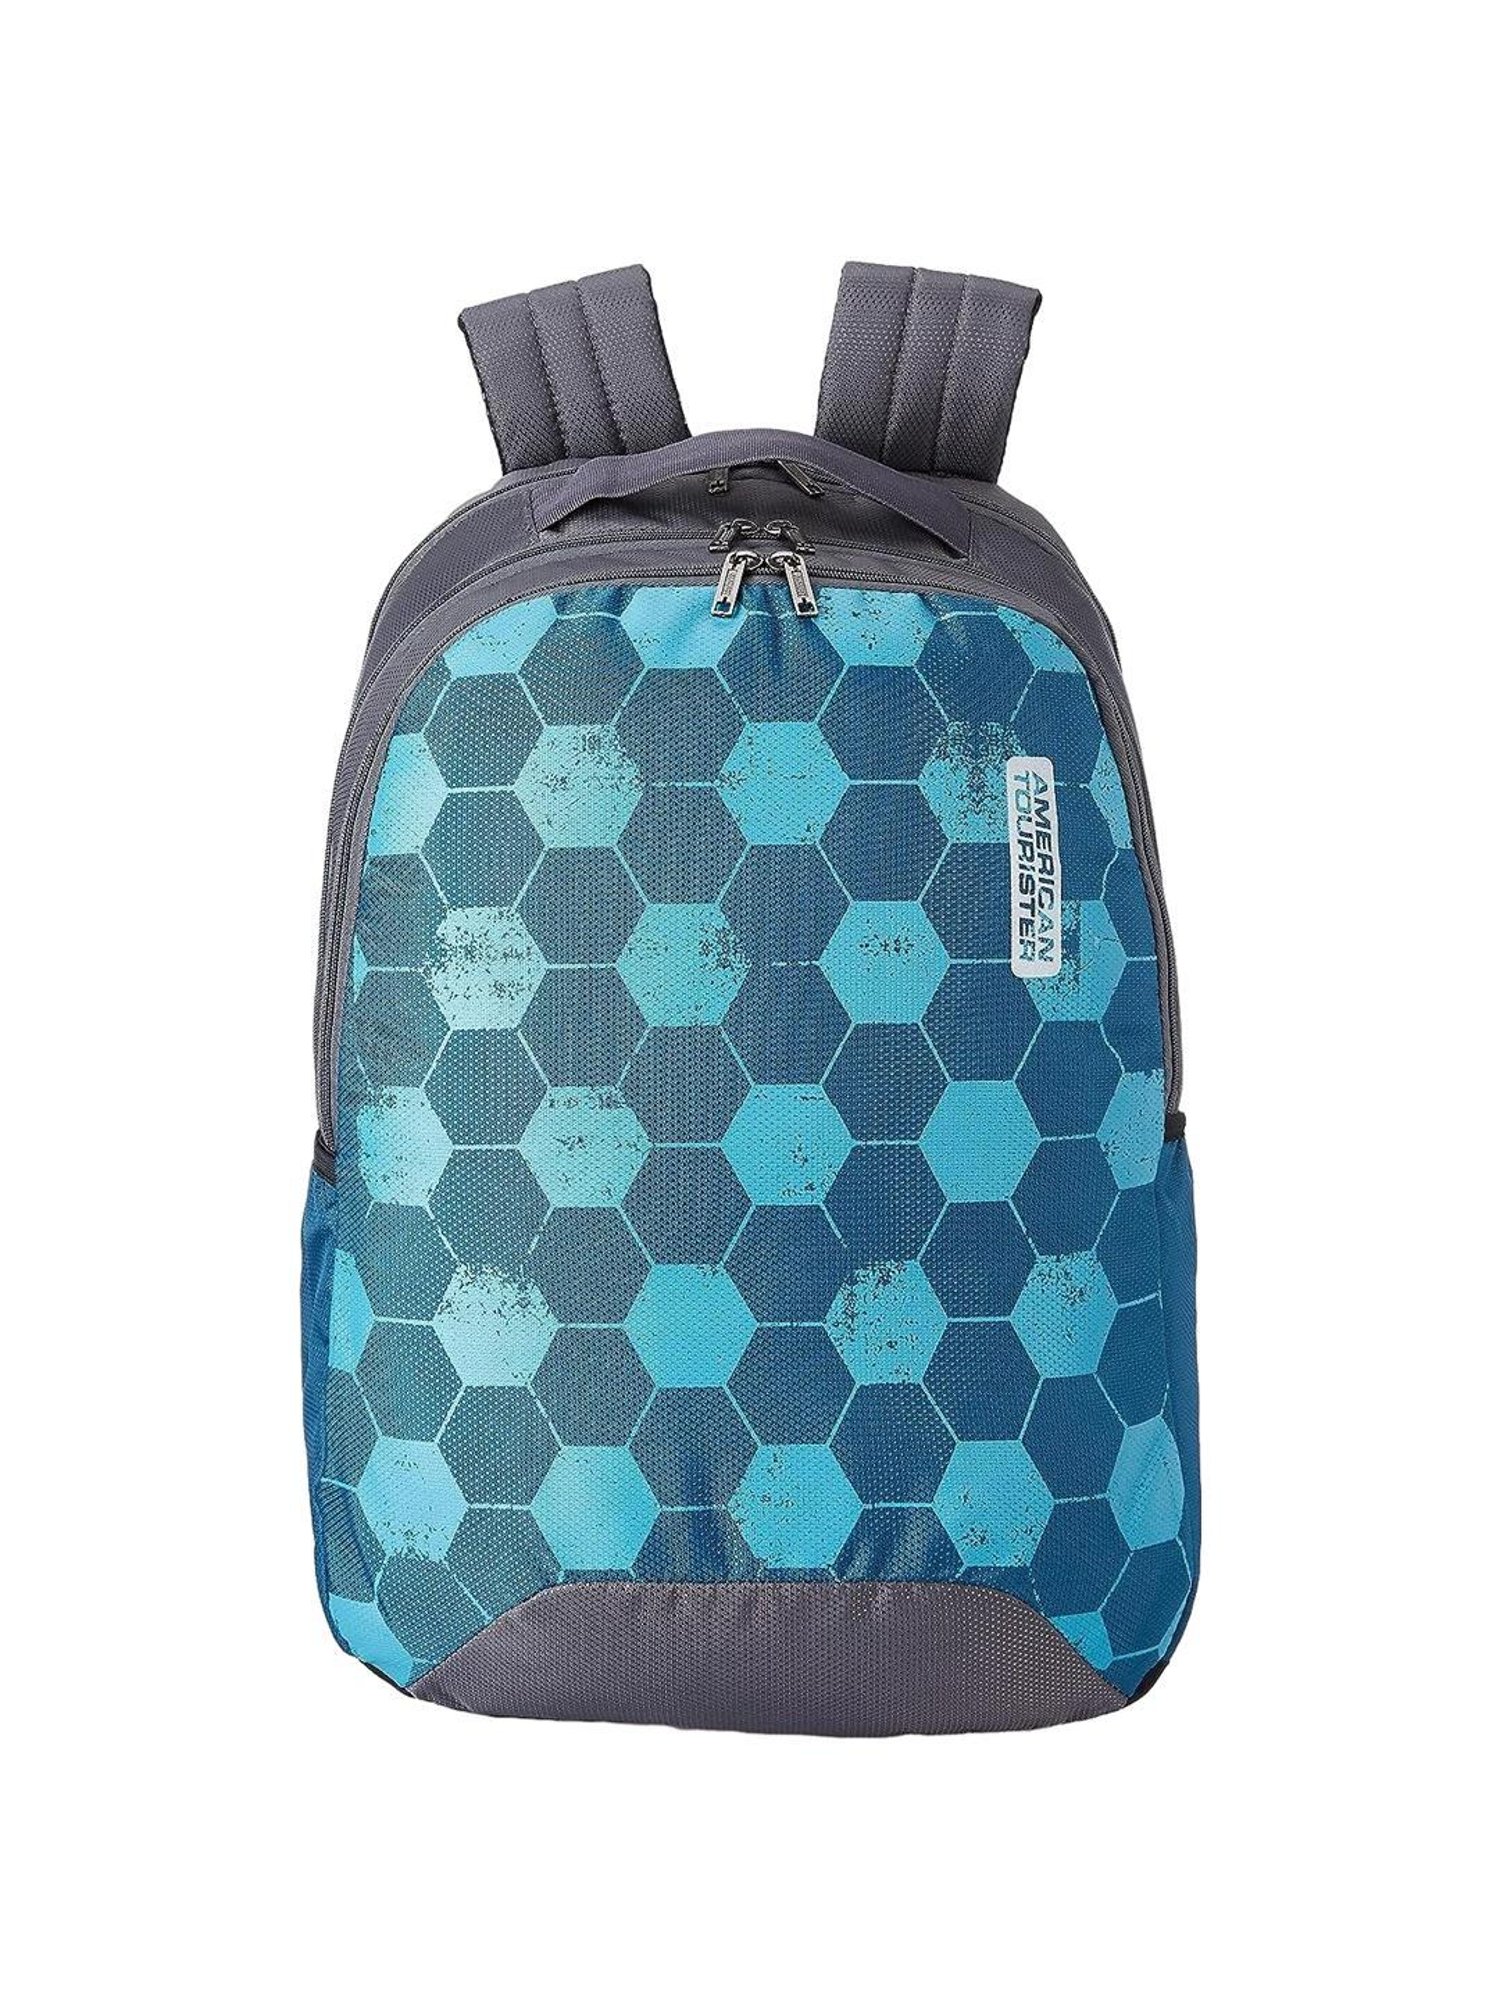 UpBeat zip American Tourister backpack